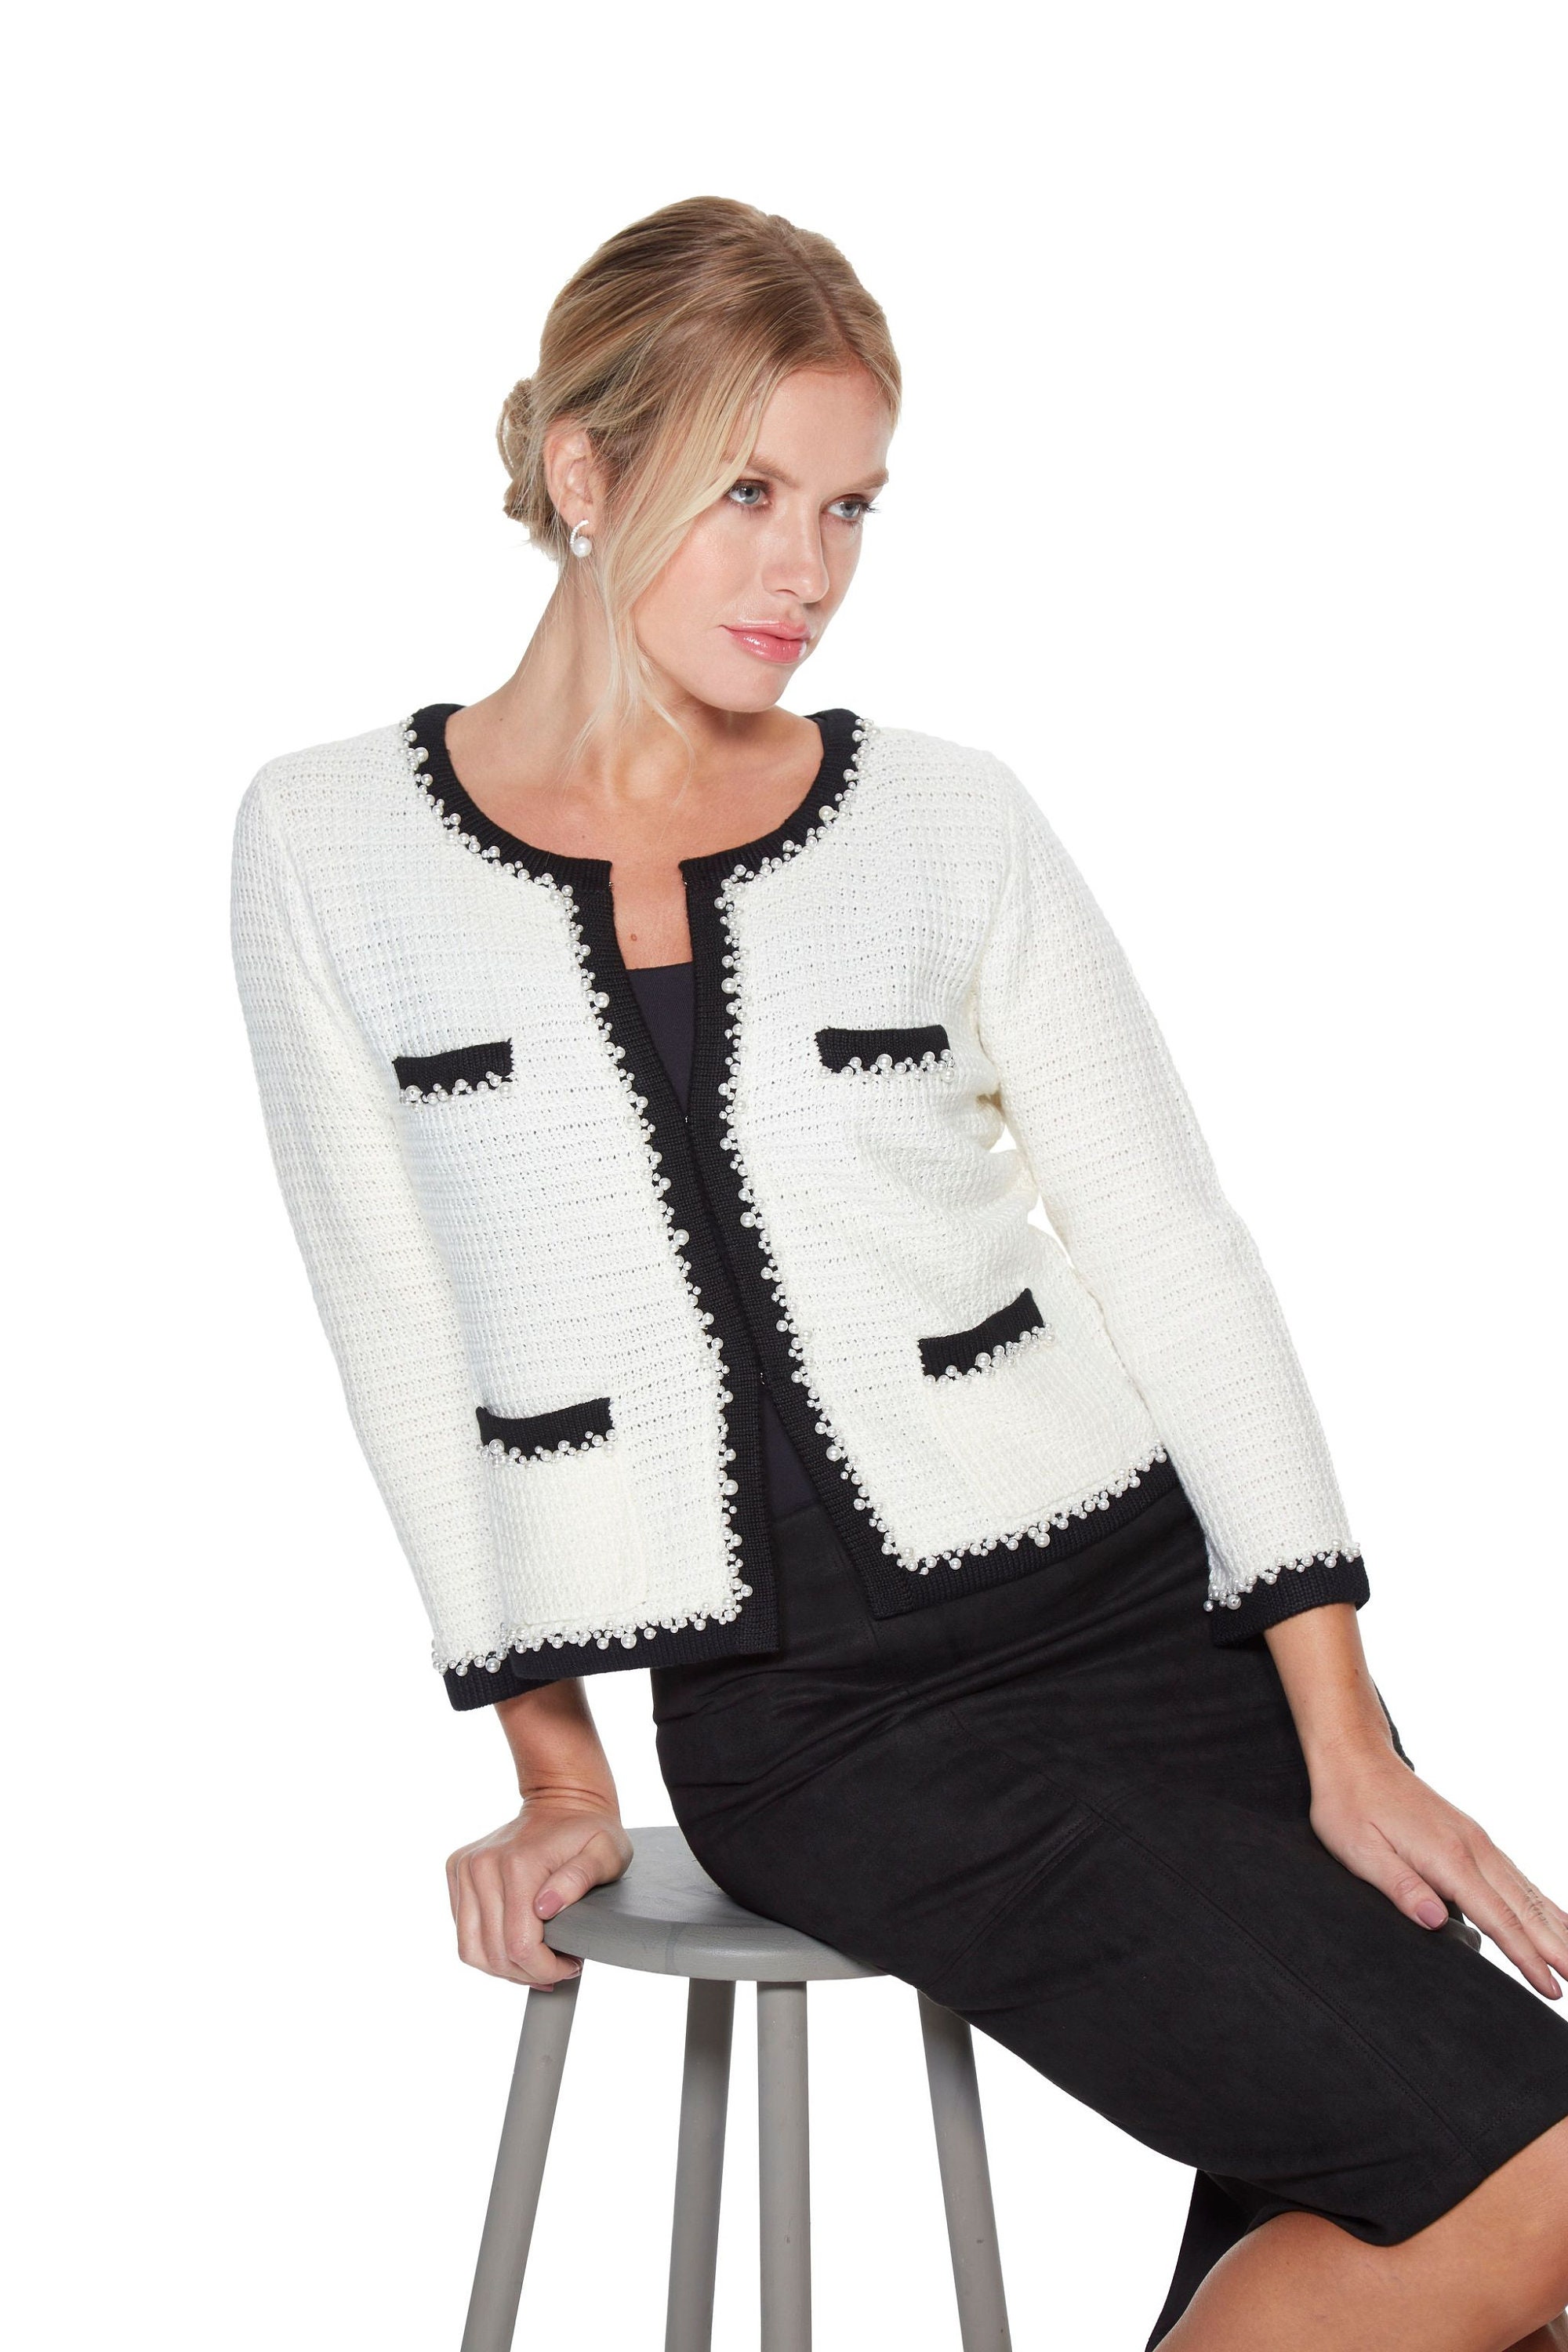 Ladies Knitted Jacket in White Edged in Black and Trimmed - Etsy UK